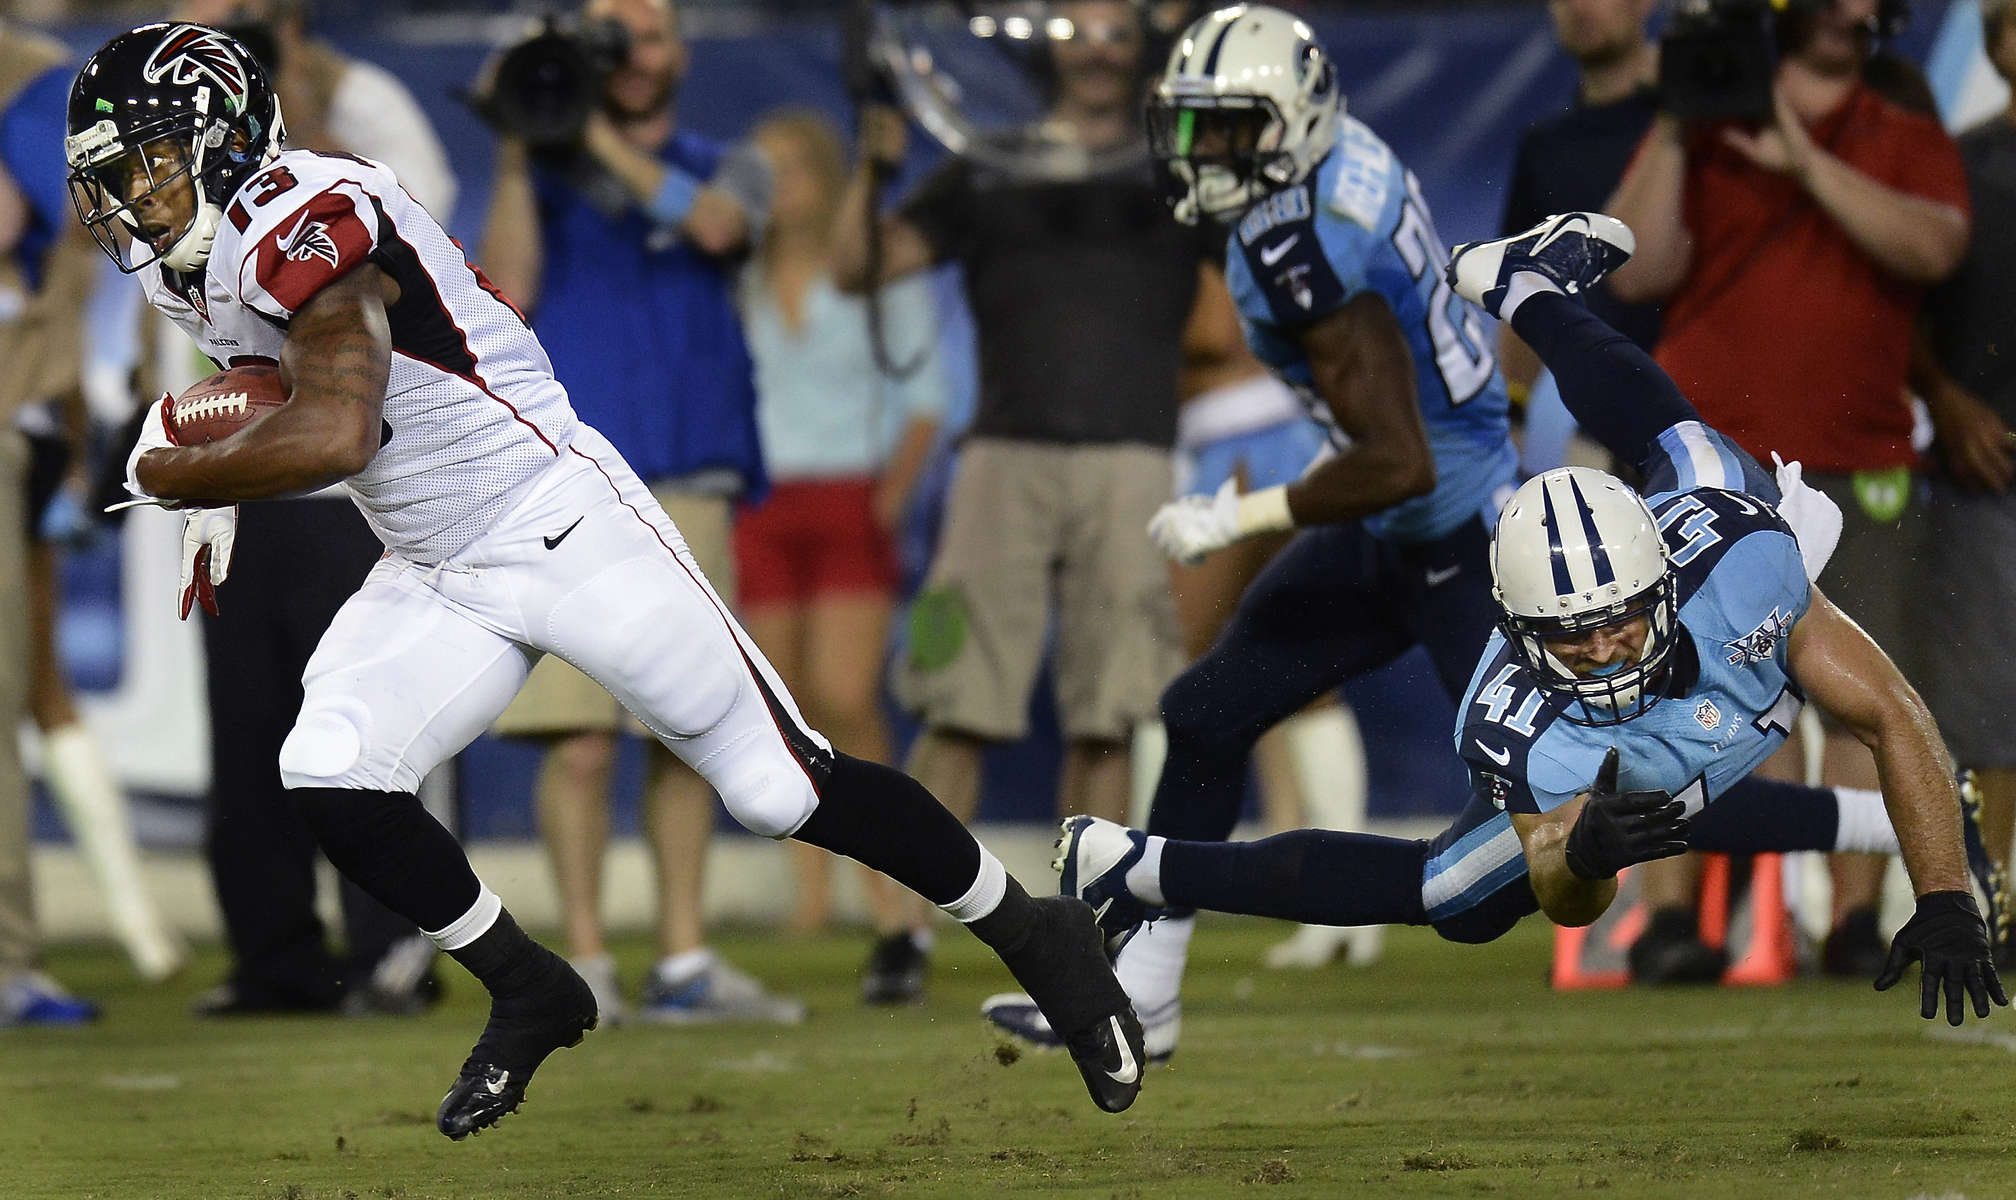 Atlanta Falcons wide receiver Darius Johnson runs theball toward the end zone for a touchdown as Tennessee Titans Corey Lynch misses the tackle during the secondhalf of an NFL preseason football game on Aug. 24, 2013, in Nashville, Tenn. (AP Photo/Mark Zaleski)